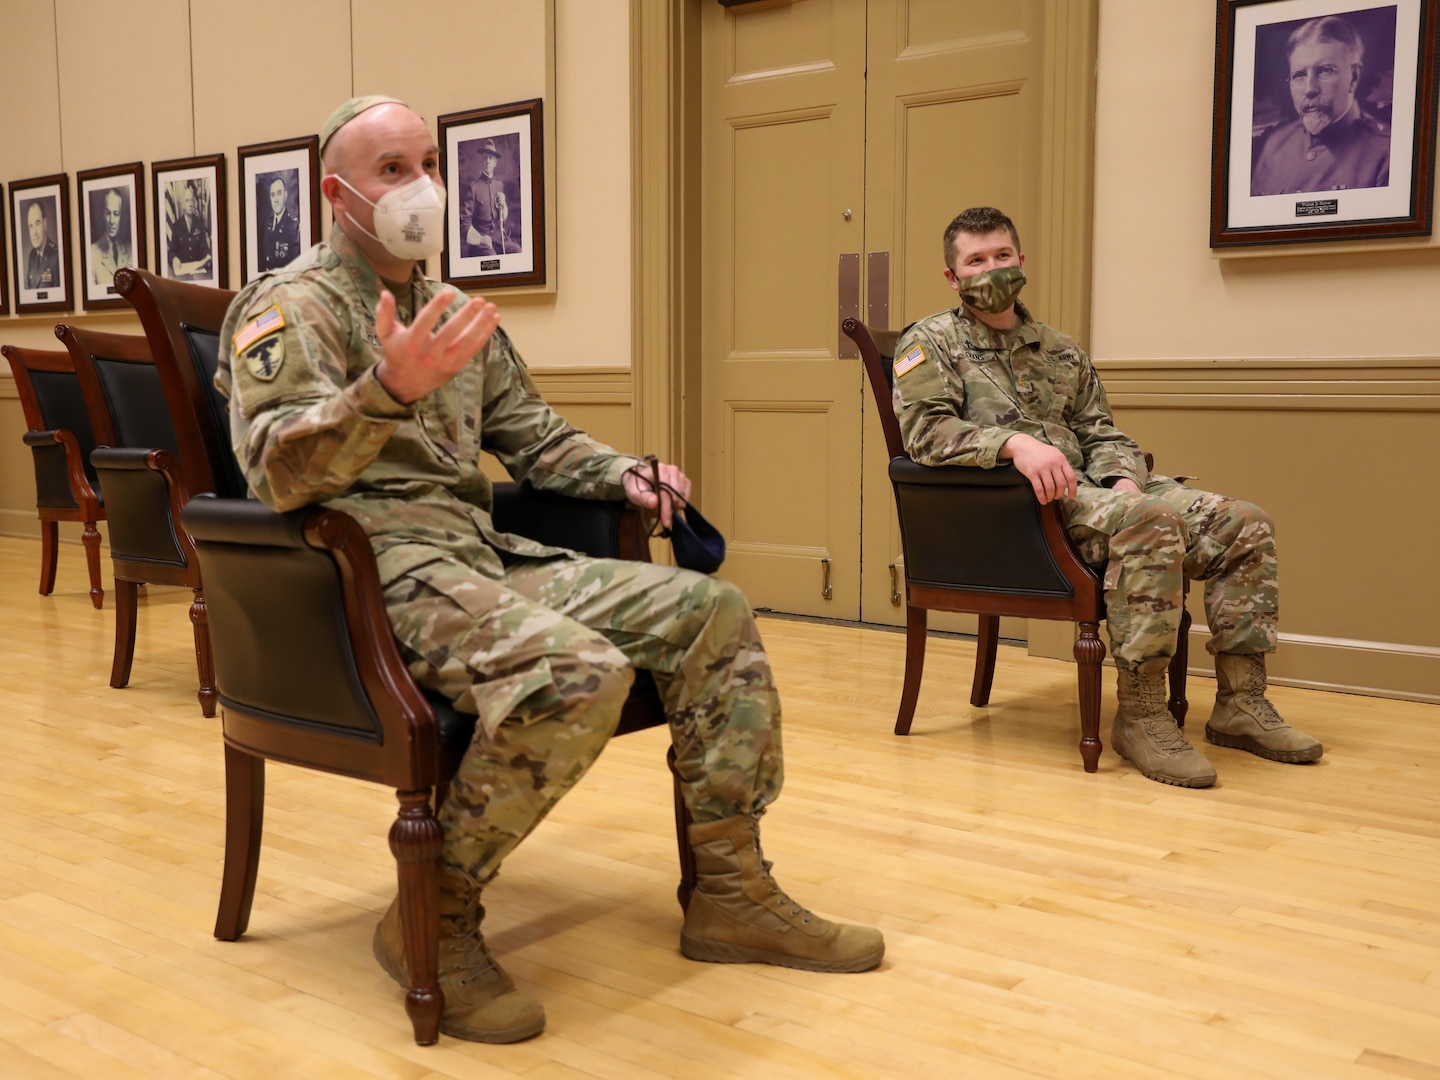 Chaplain (Maj.) Aaron Rozovsky and Chaplain (Maj.) David Evans, assigned to the Armory of the District of Columbia National Guard, share a conversation reflecting on their journey to become Chaplains in the National Guard